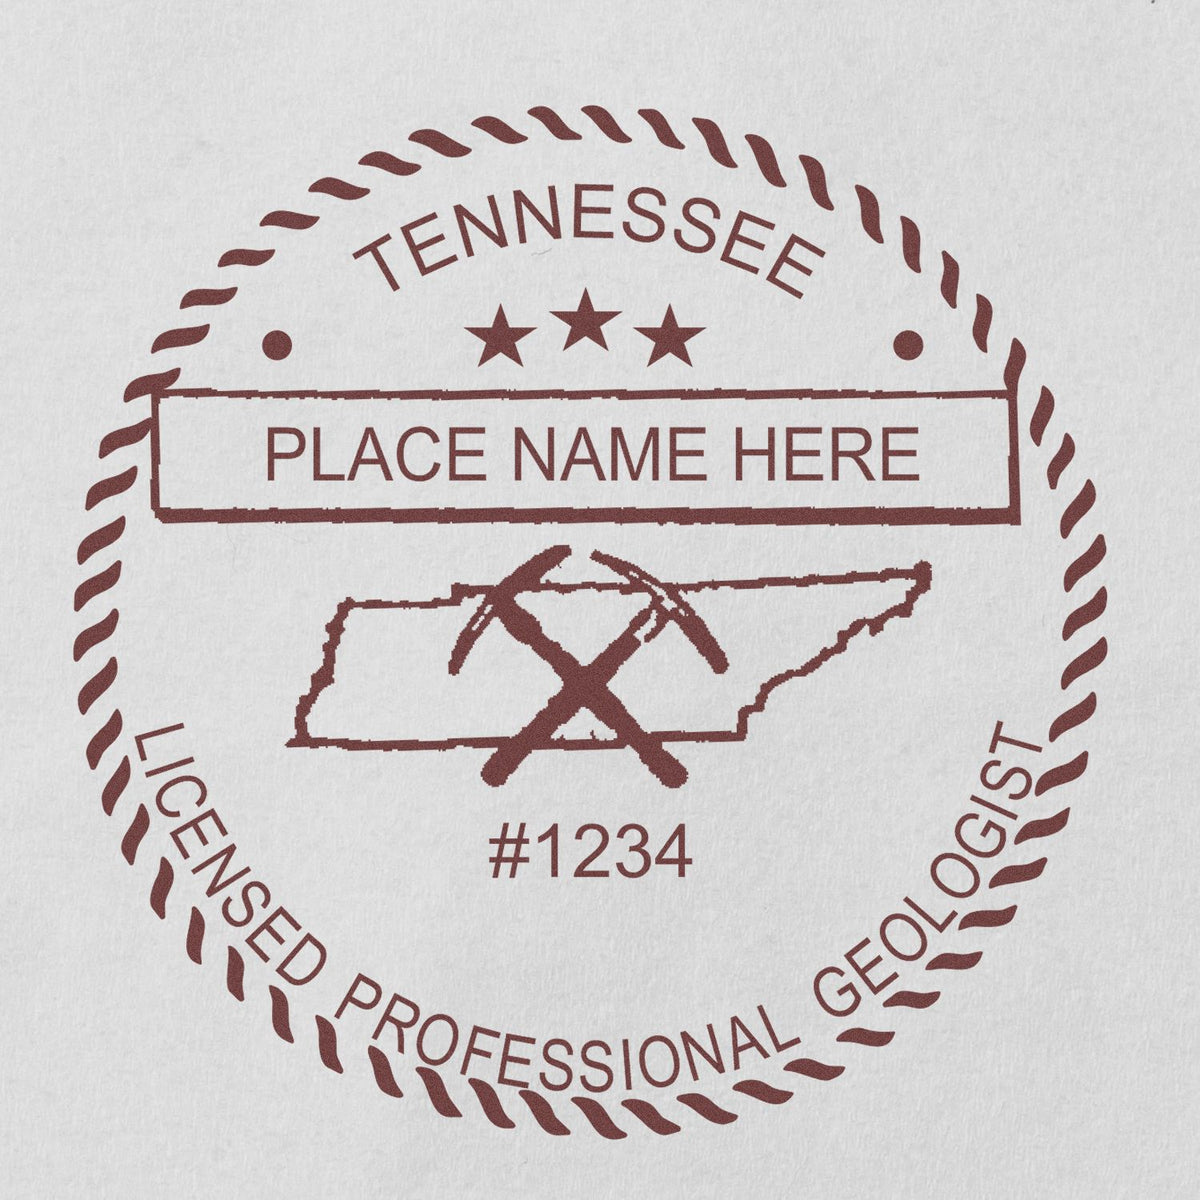 The Self-Inking Tennessee Geologist Stamp stamp impression comes to life with a crisp, detailed image stamped on paper - showcasing true professional quality.